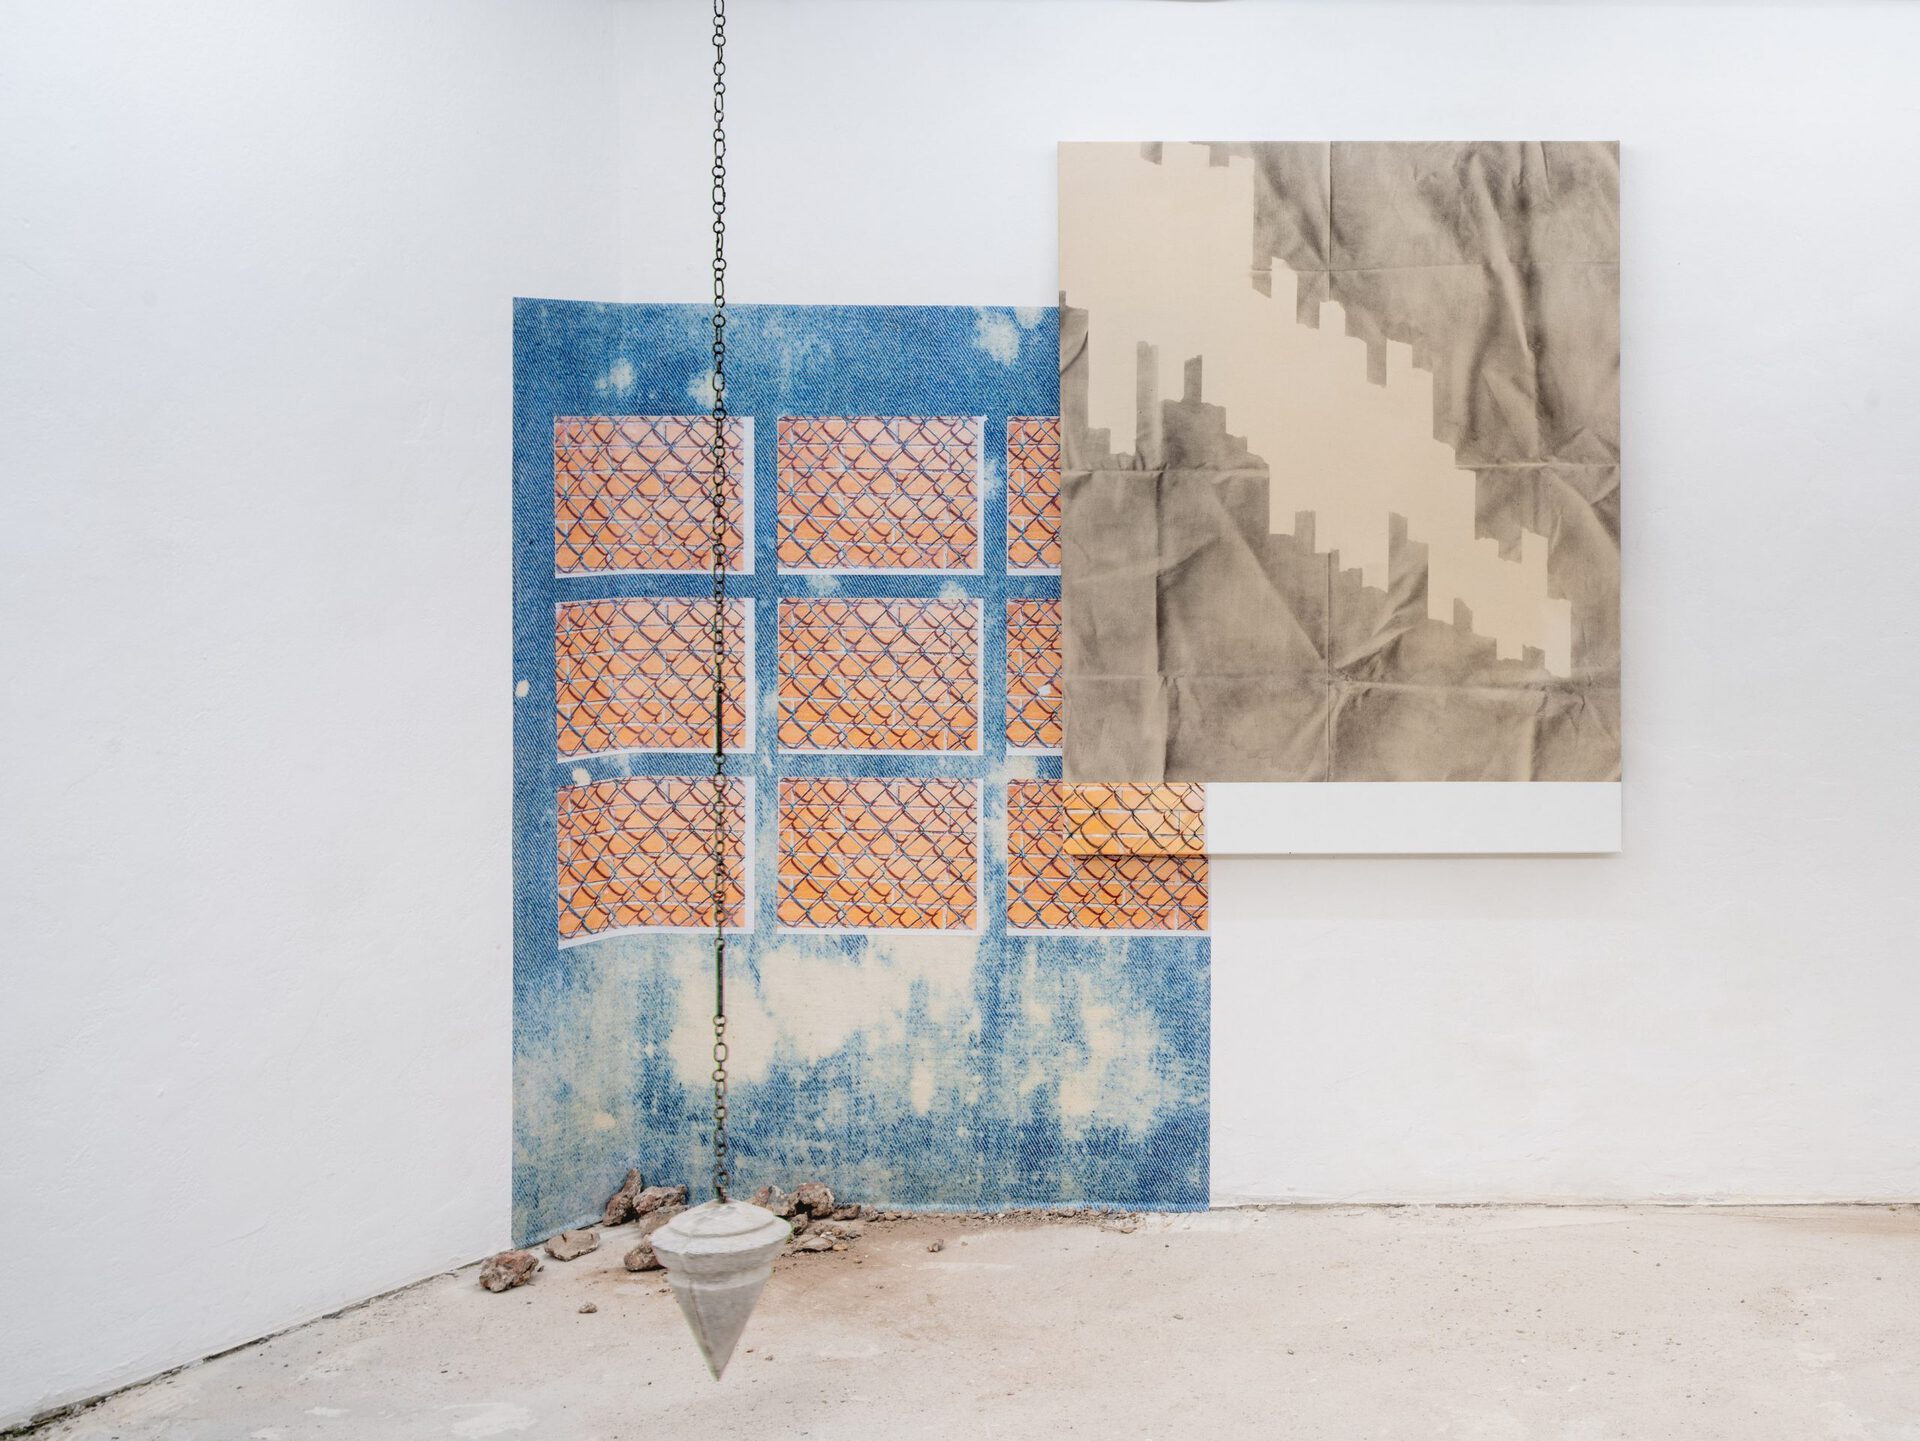 Sabrina Podemski: MNÆNOSYNIC  20 (2021), wallpaper 180 x 140 cm, painting 140 x 100 cm; Last forever or die tryin‘ (2021), concrete, forged steel chain